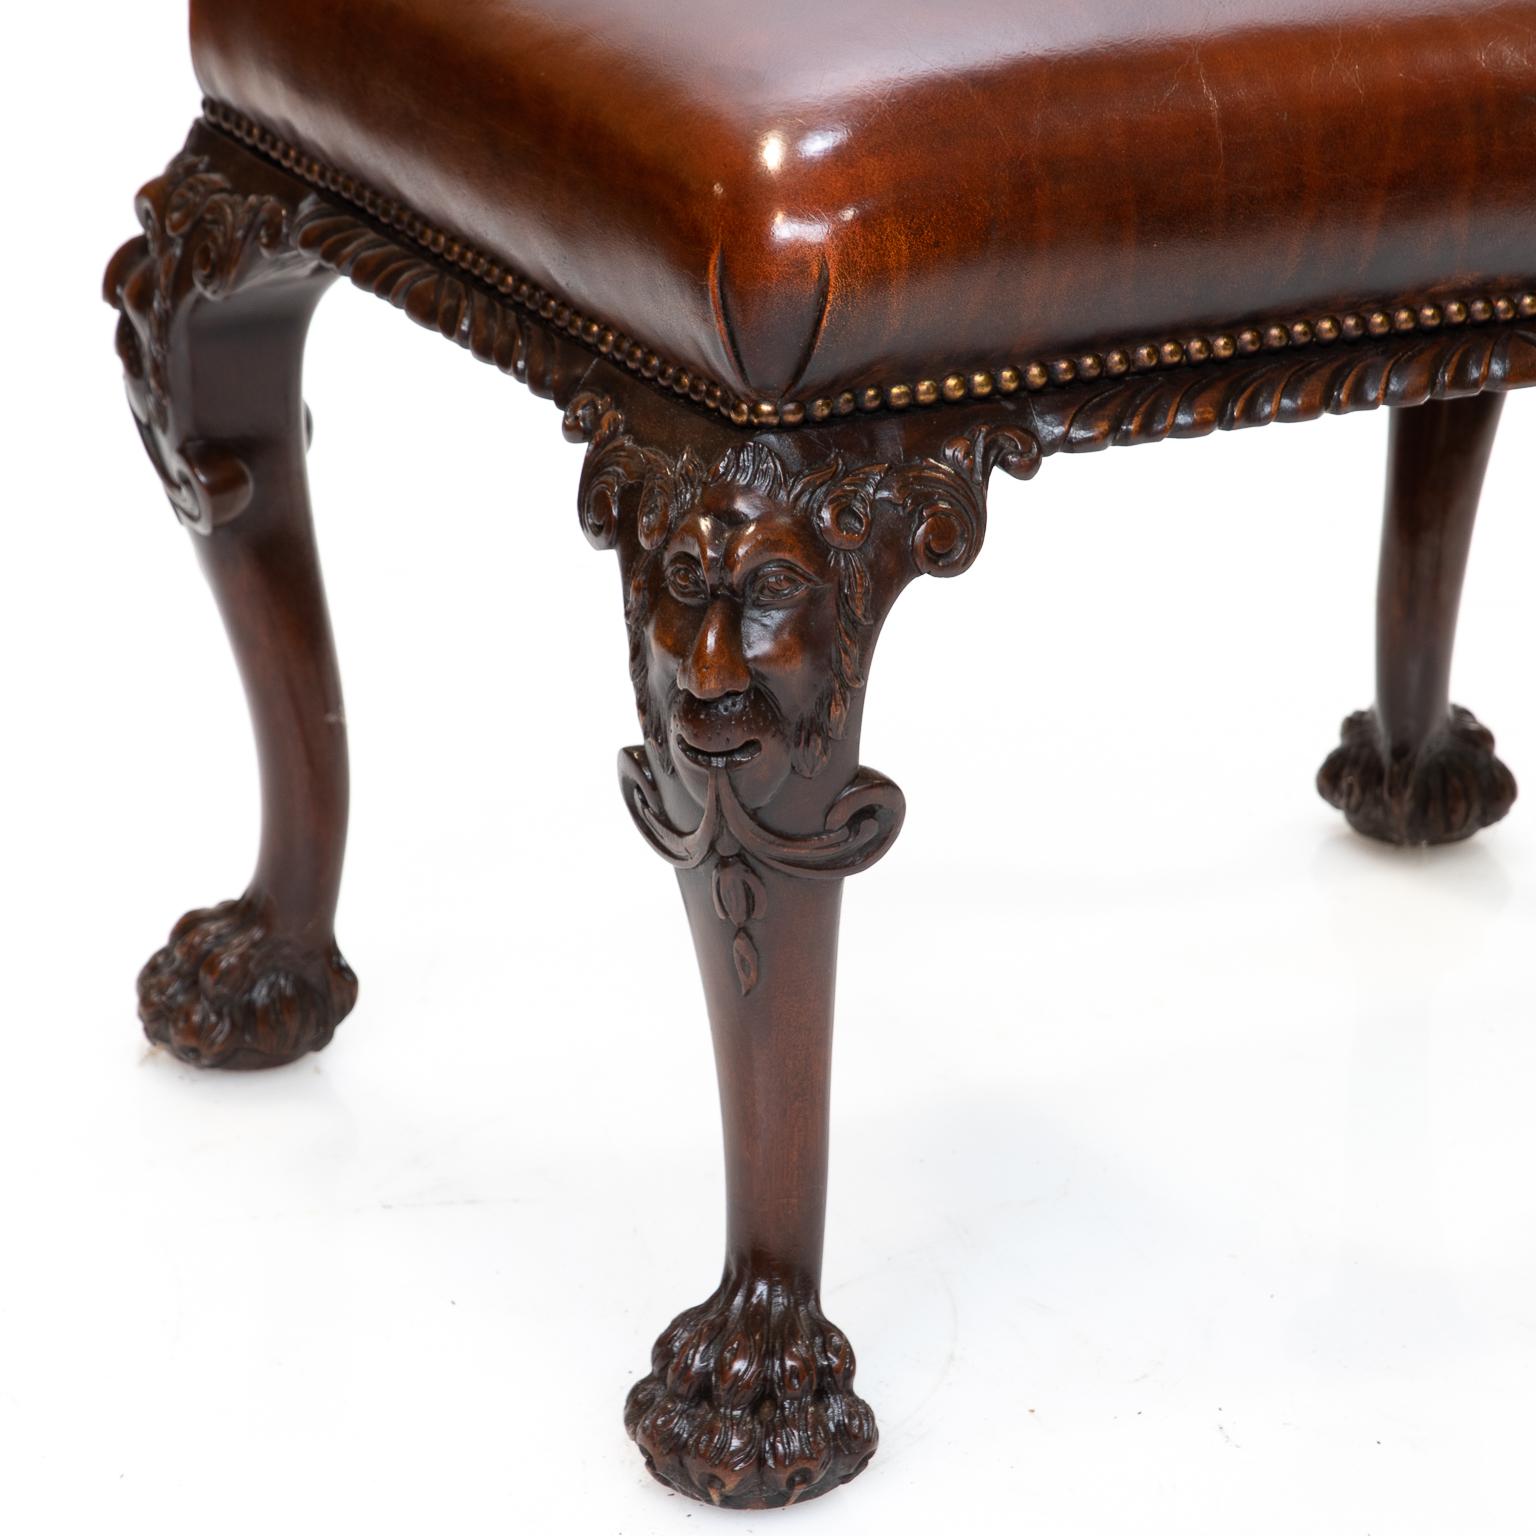 A 19th century walnut Chippendale style, English made, carved stool with leather covering. This stool has been refinished and reupholstered with a leather seat. Carved with face knees, acanthus leaf and claw and ball feet. A fine example of Thomas